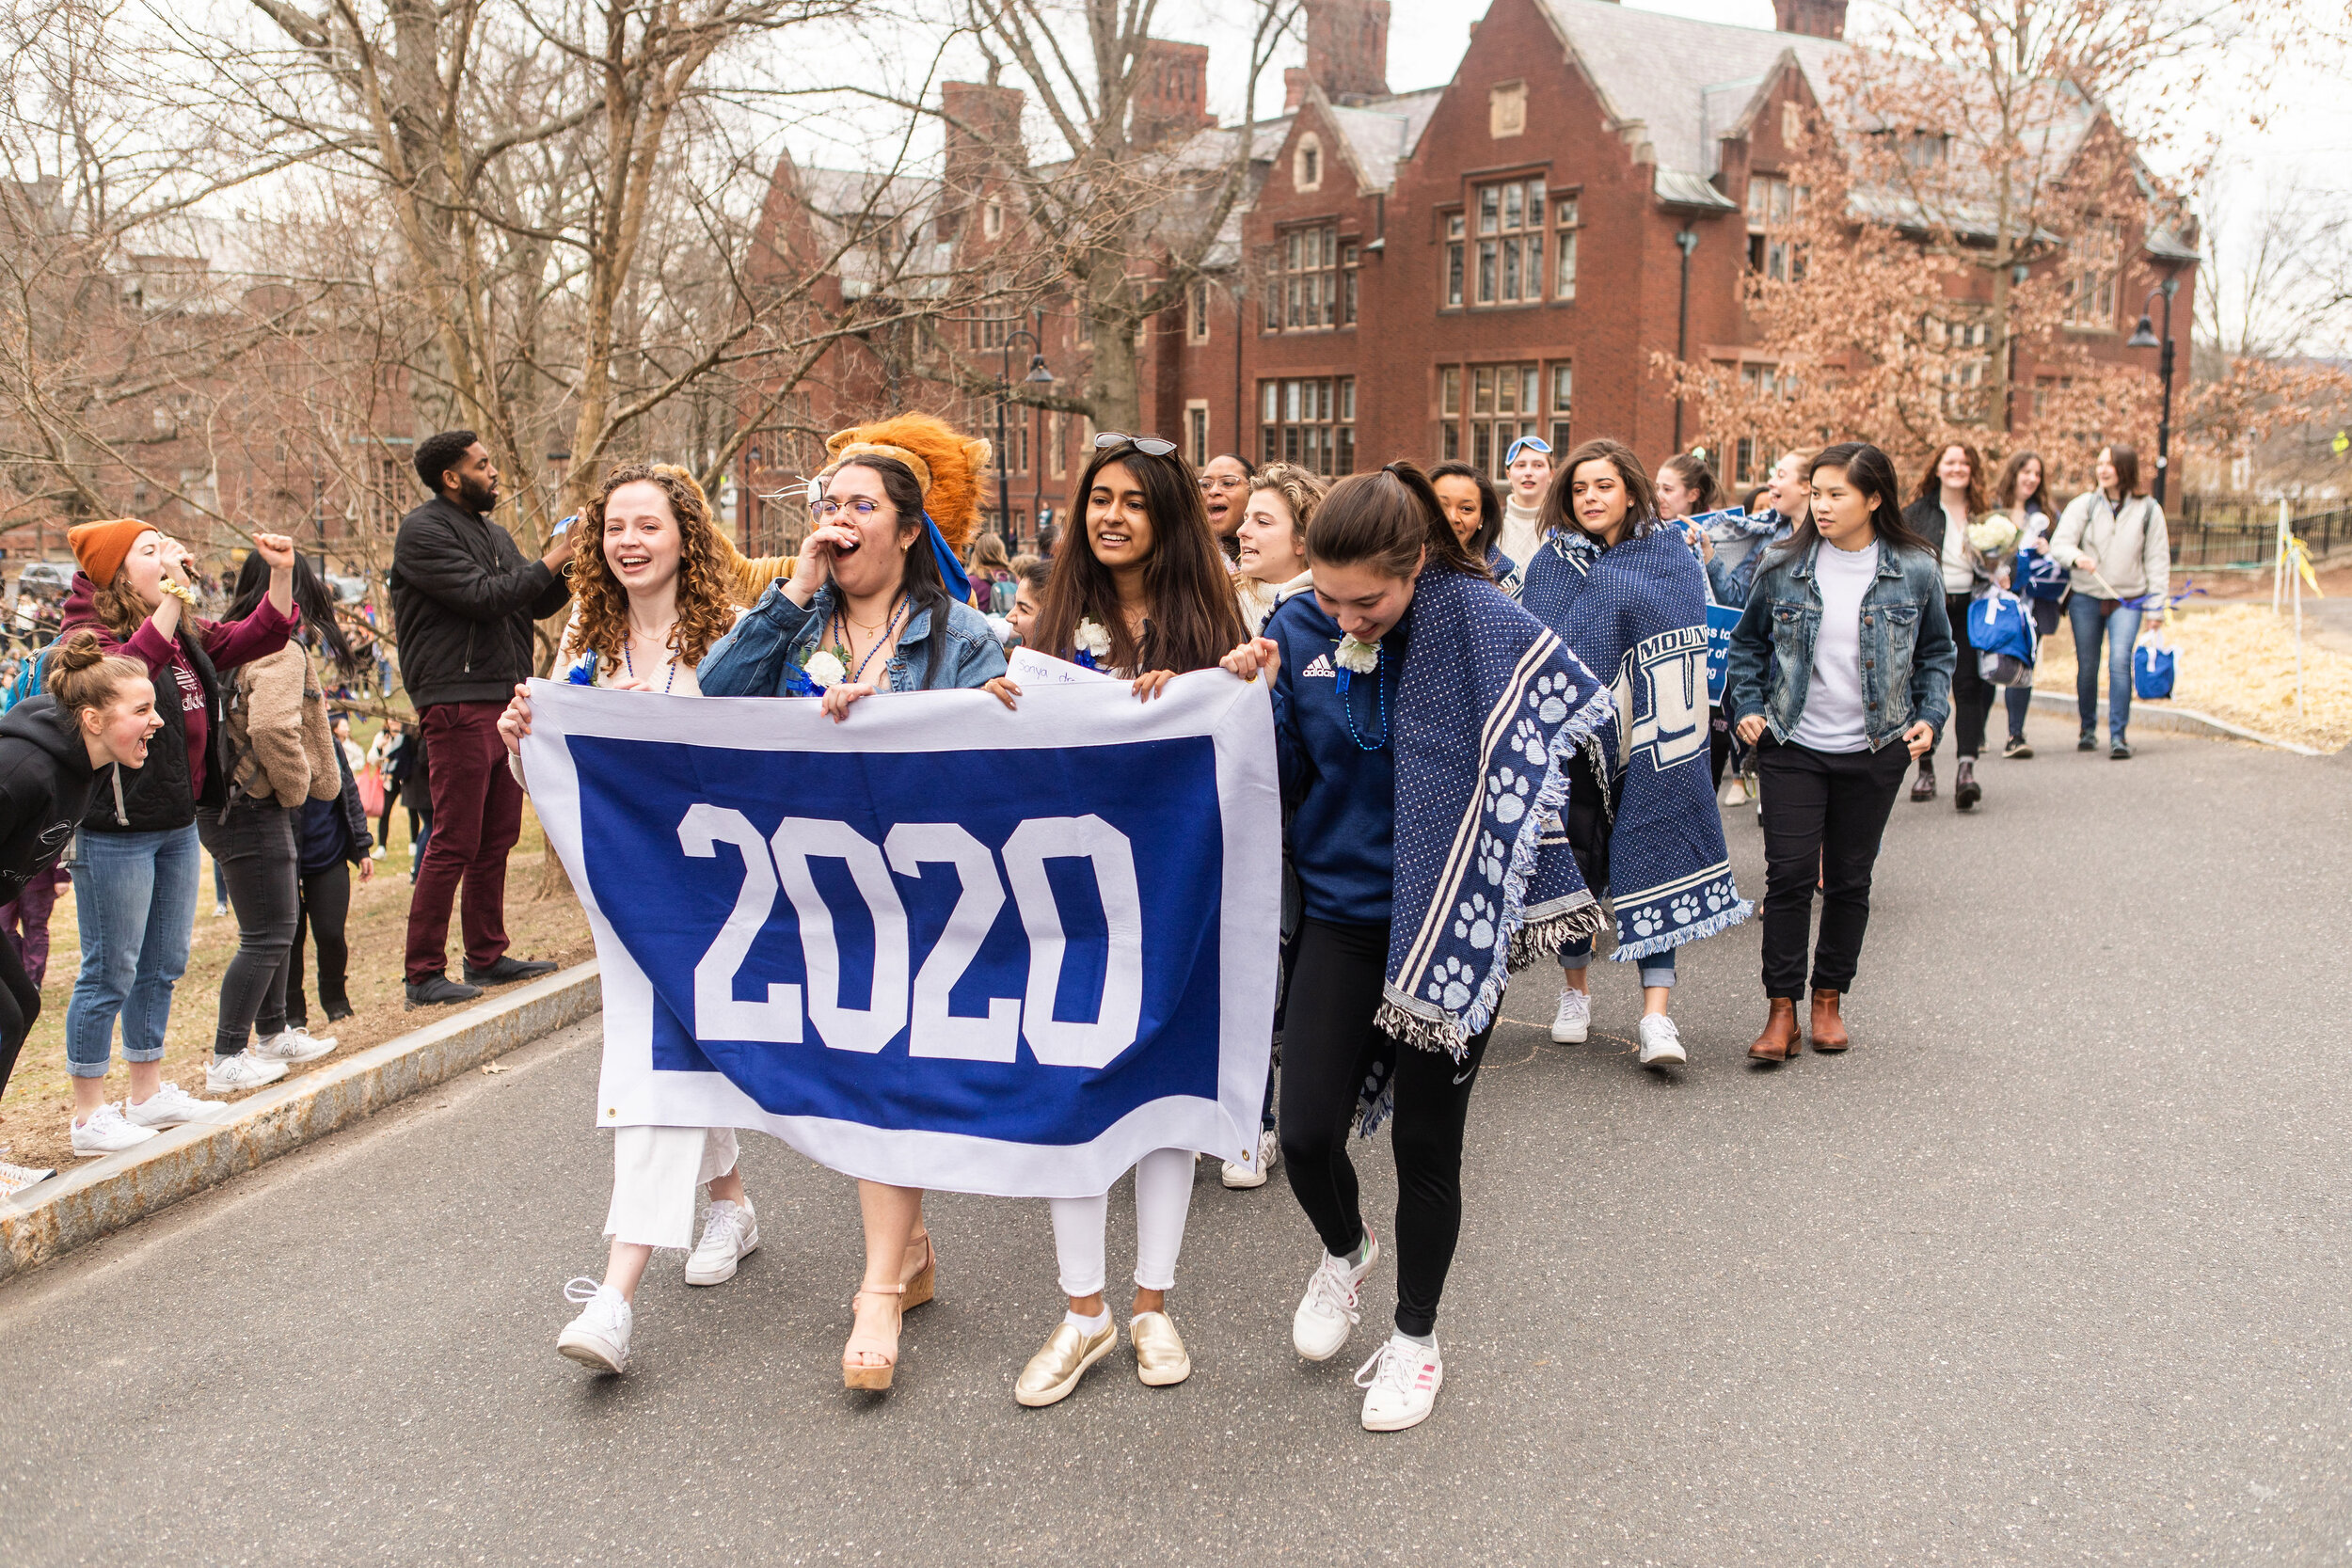  Photos courtesy of Joanna Chattman and Mount Holyoke College  Members of the 2020 Class Board led this year’s impromptu Laurel Parade, which began outside Rockefeller Hall and ended at Mary Lyon’s grave. 